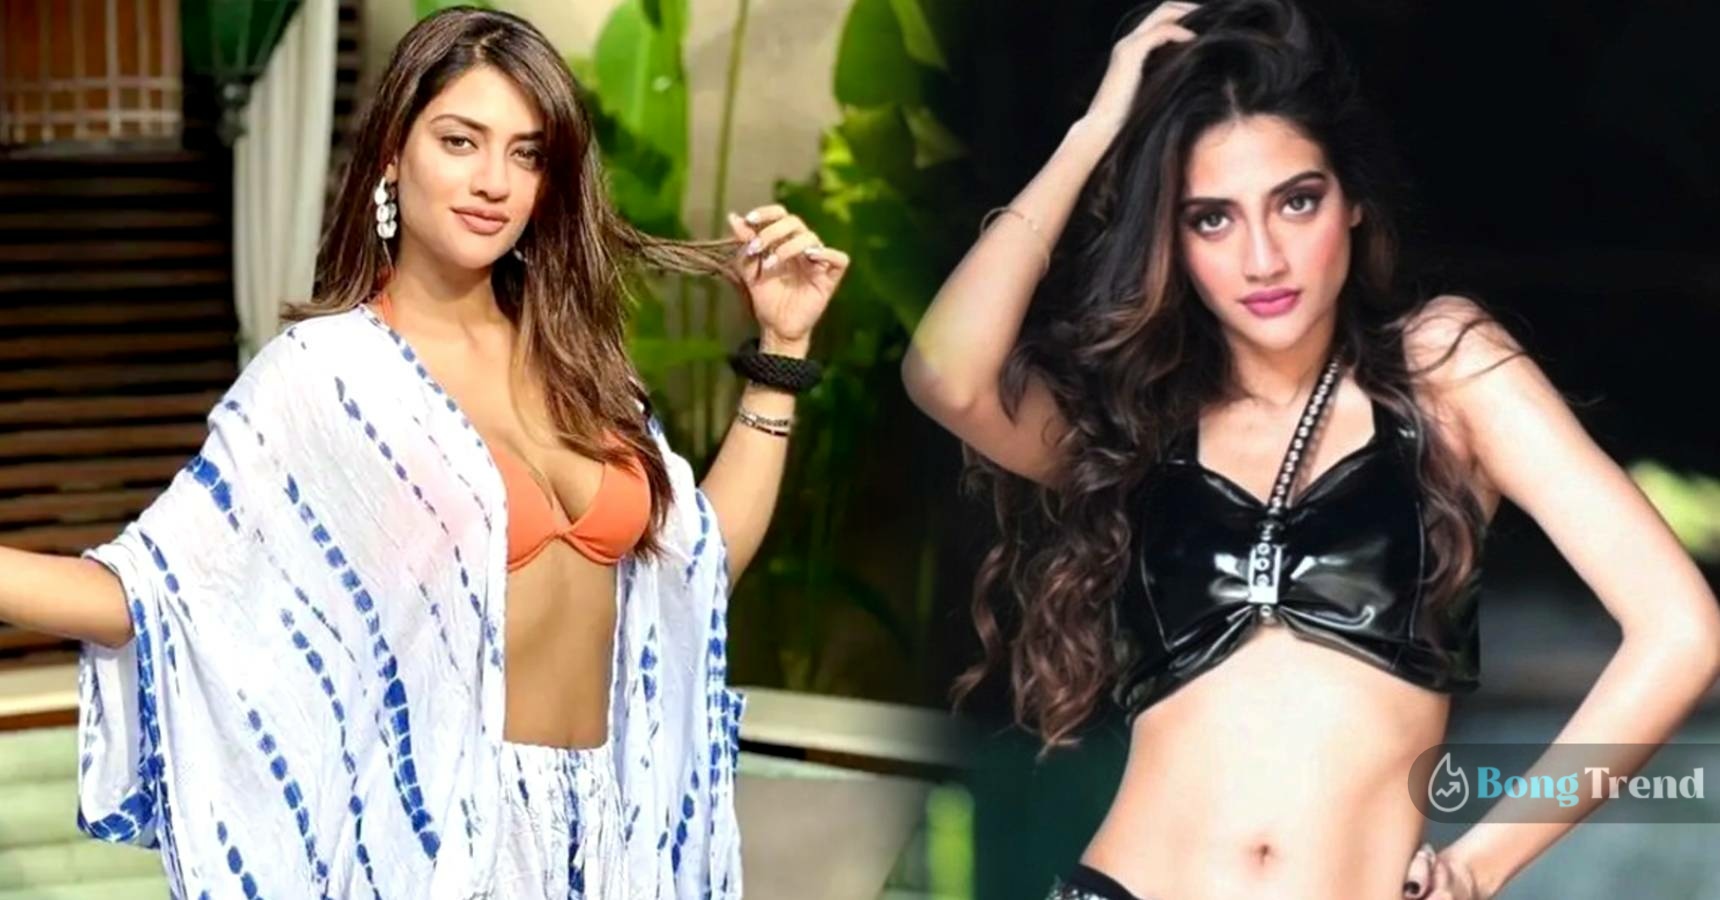 All you need to know about Tollywood actress Nusrat Jahan’s fitness secret